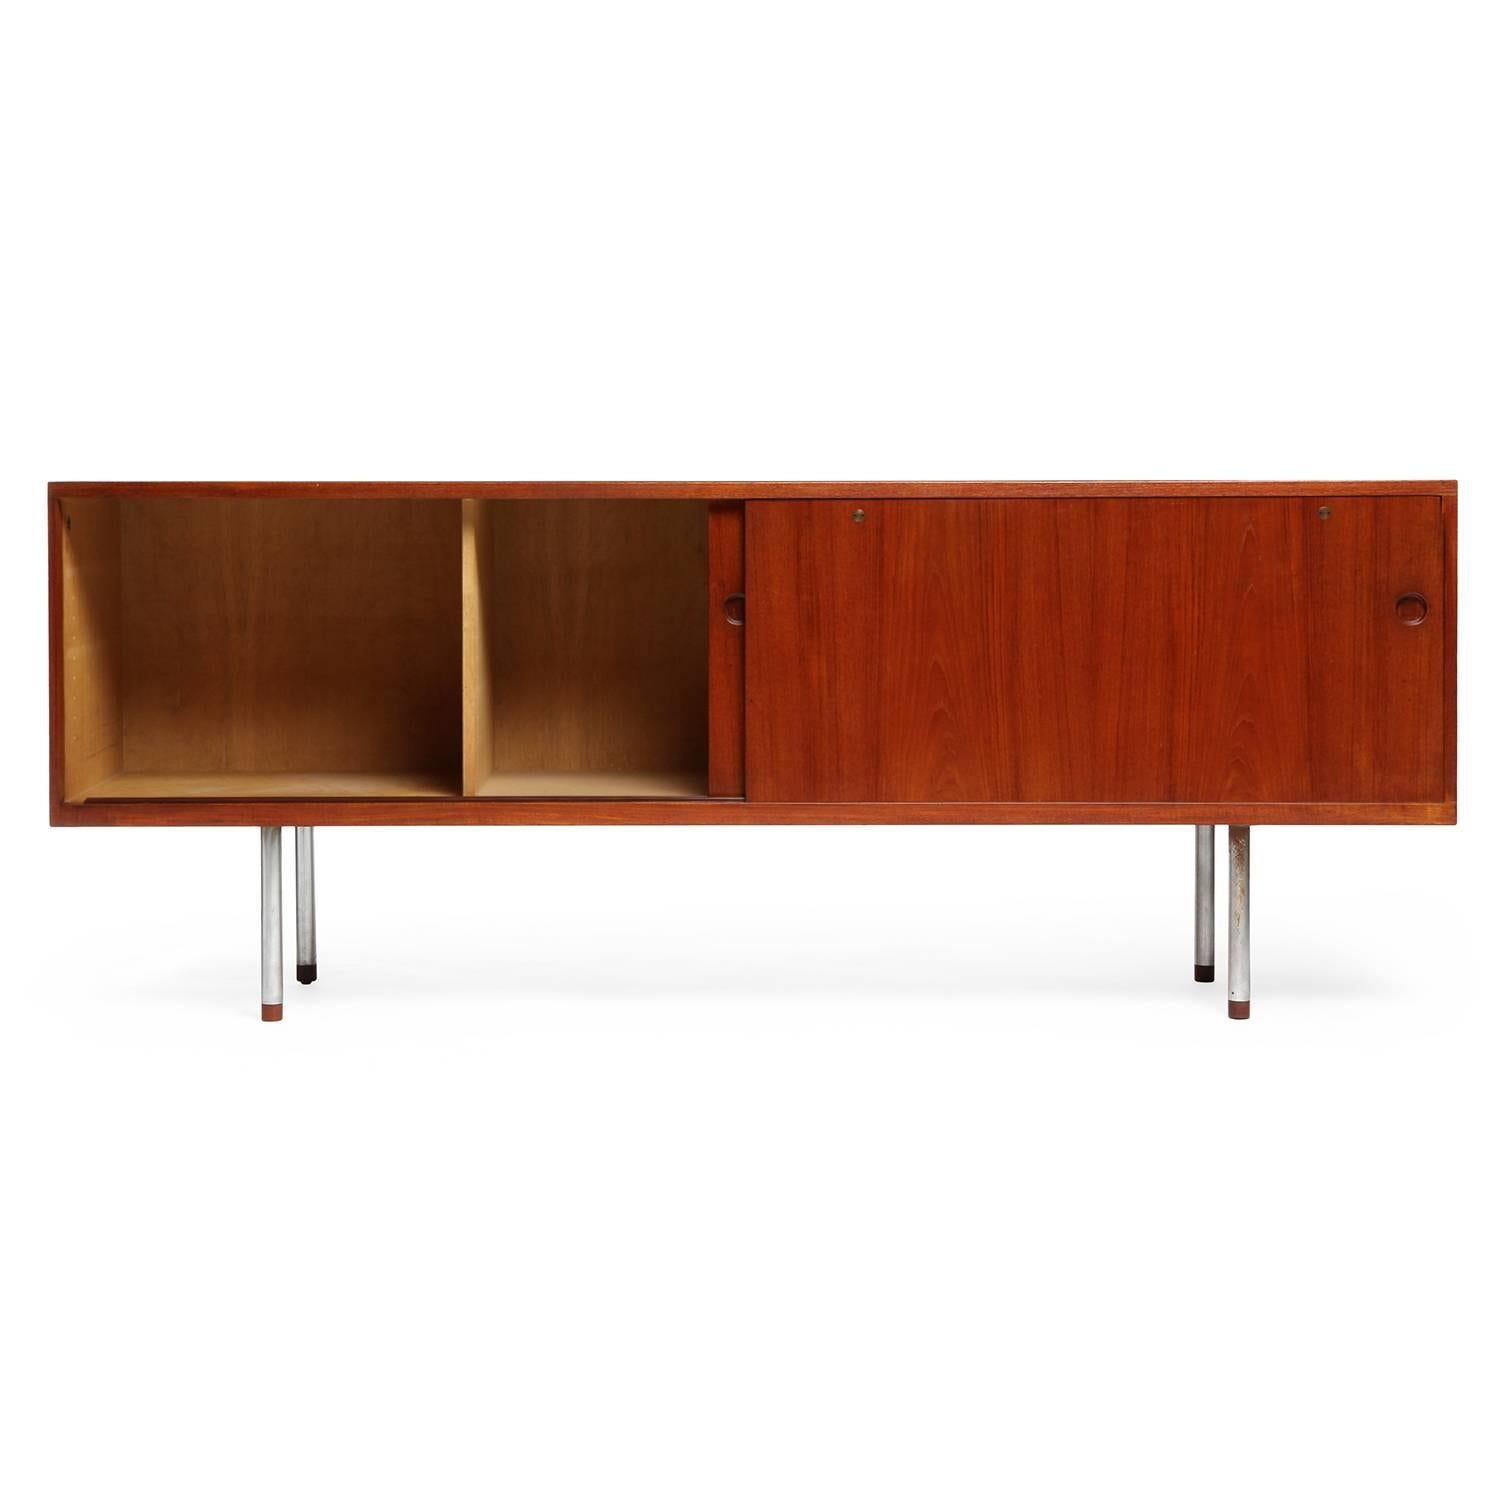 A fine and long credenza of spare rectilinear form having sliding doors with recessed pulls, the case floating on cylindrical brushed steel wood-capped legs.